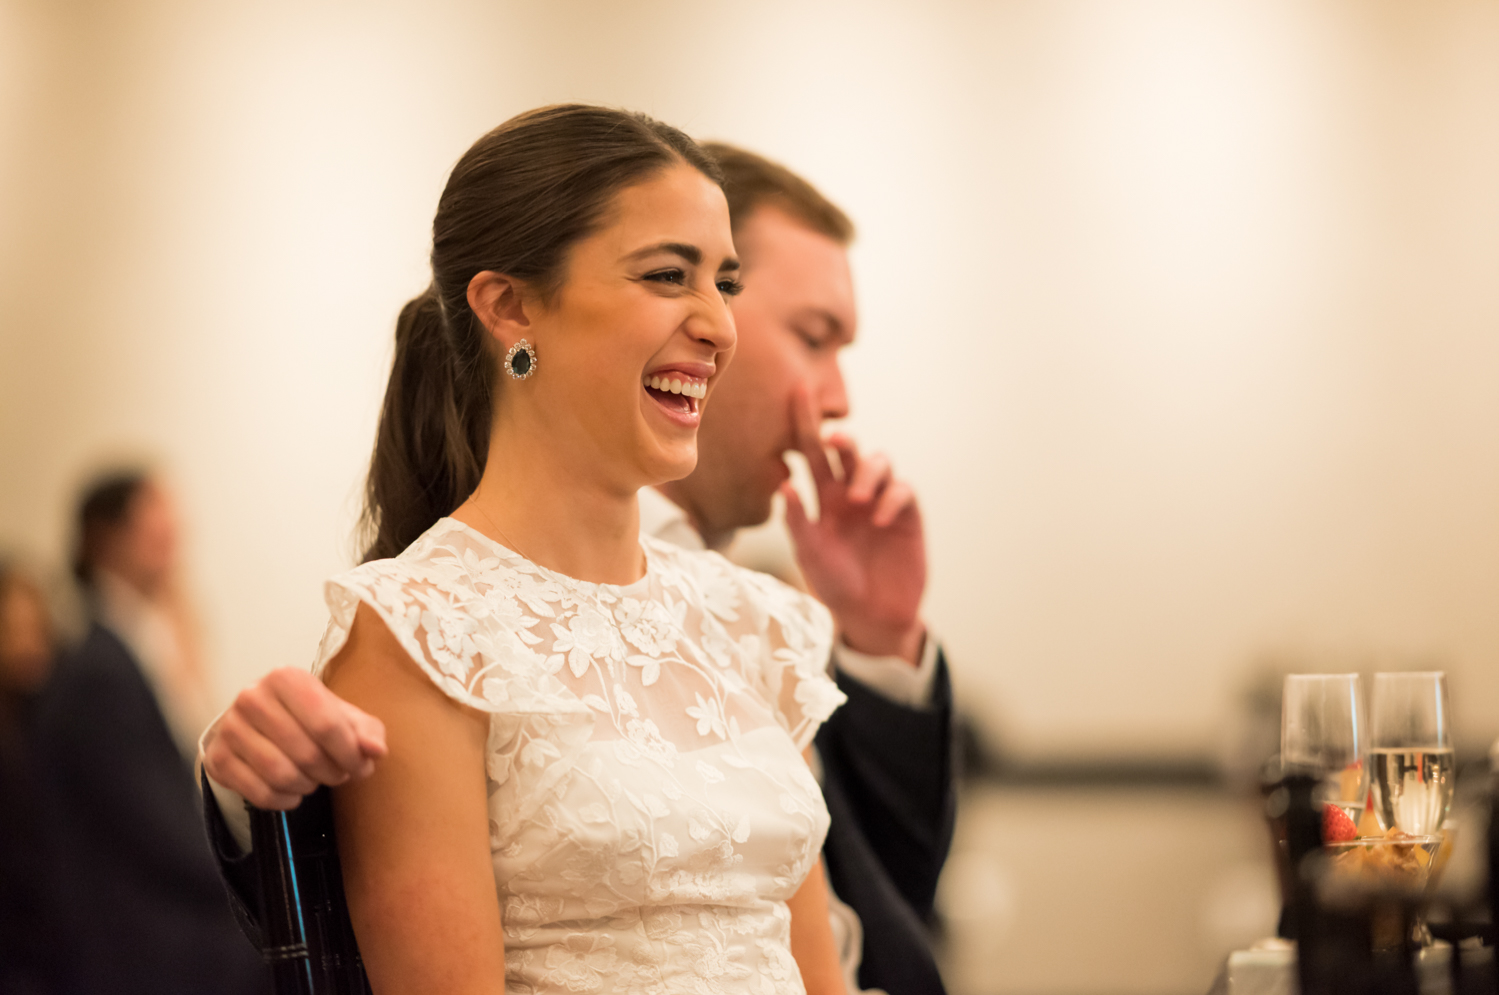 The bride laughs during a toast at the rehearsal dinner.